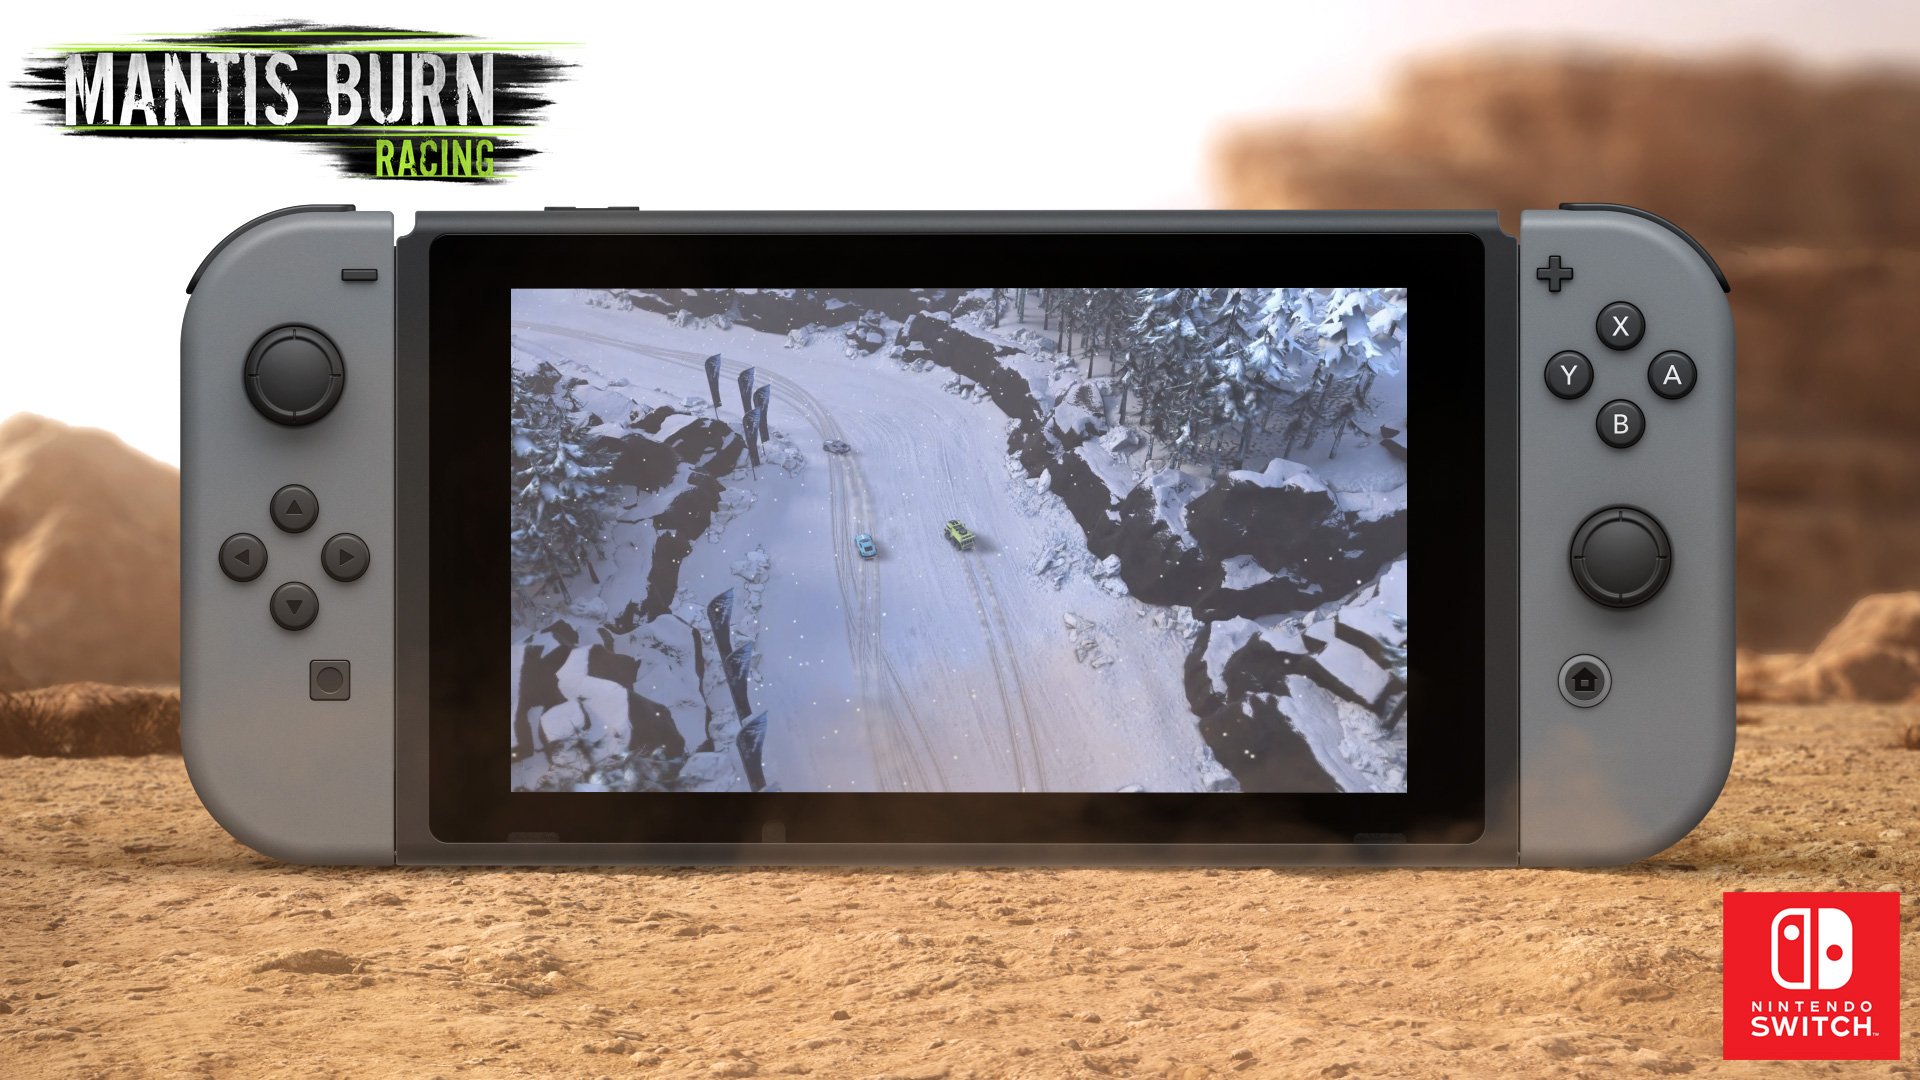 The Comics Console: Hands on with Nintendo Switch Mantis Burn Racing